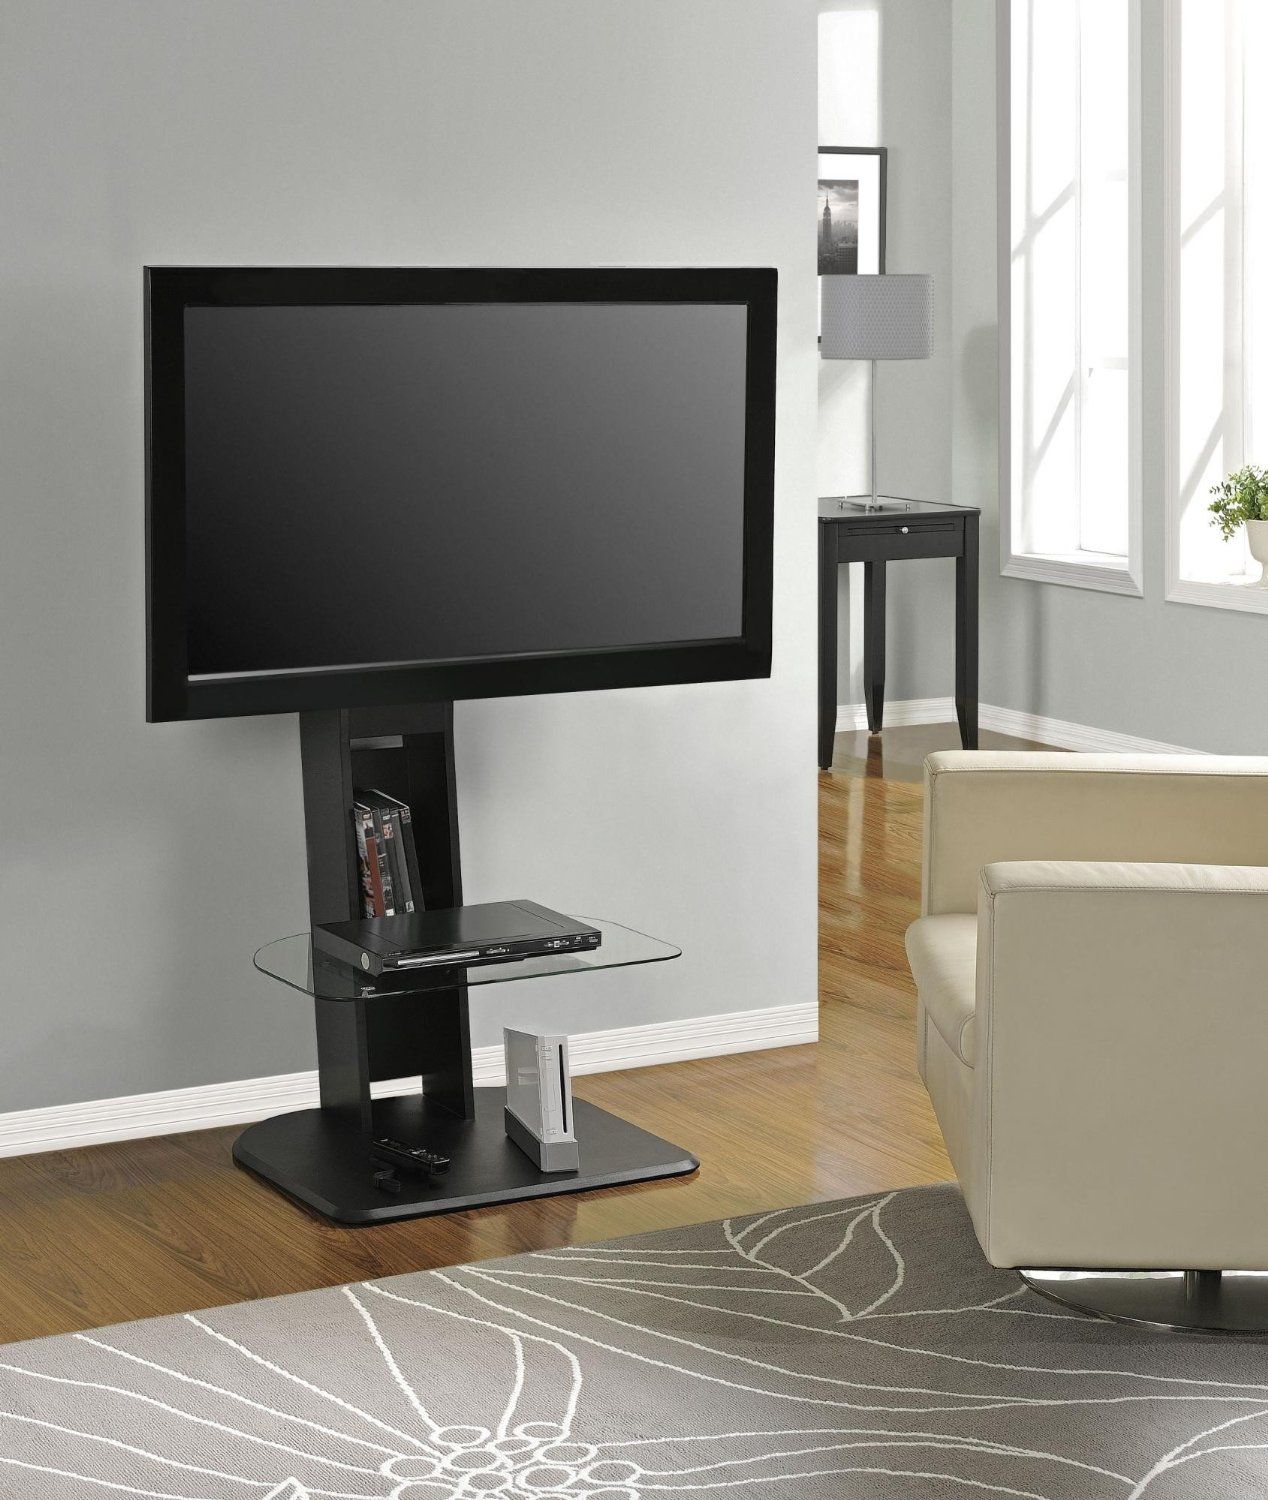 Cool Flat Screen Tv Stands With Mount – Homesfeed Within Unusual Tv Stands (View 1 of 15)